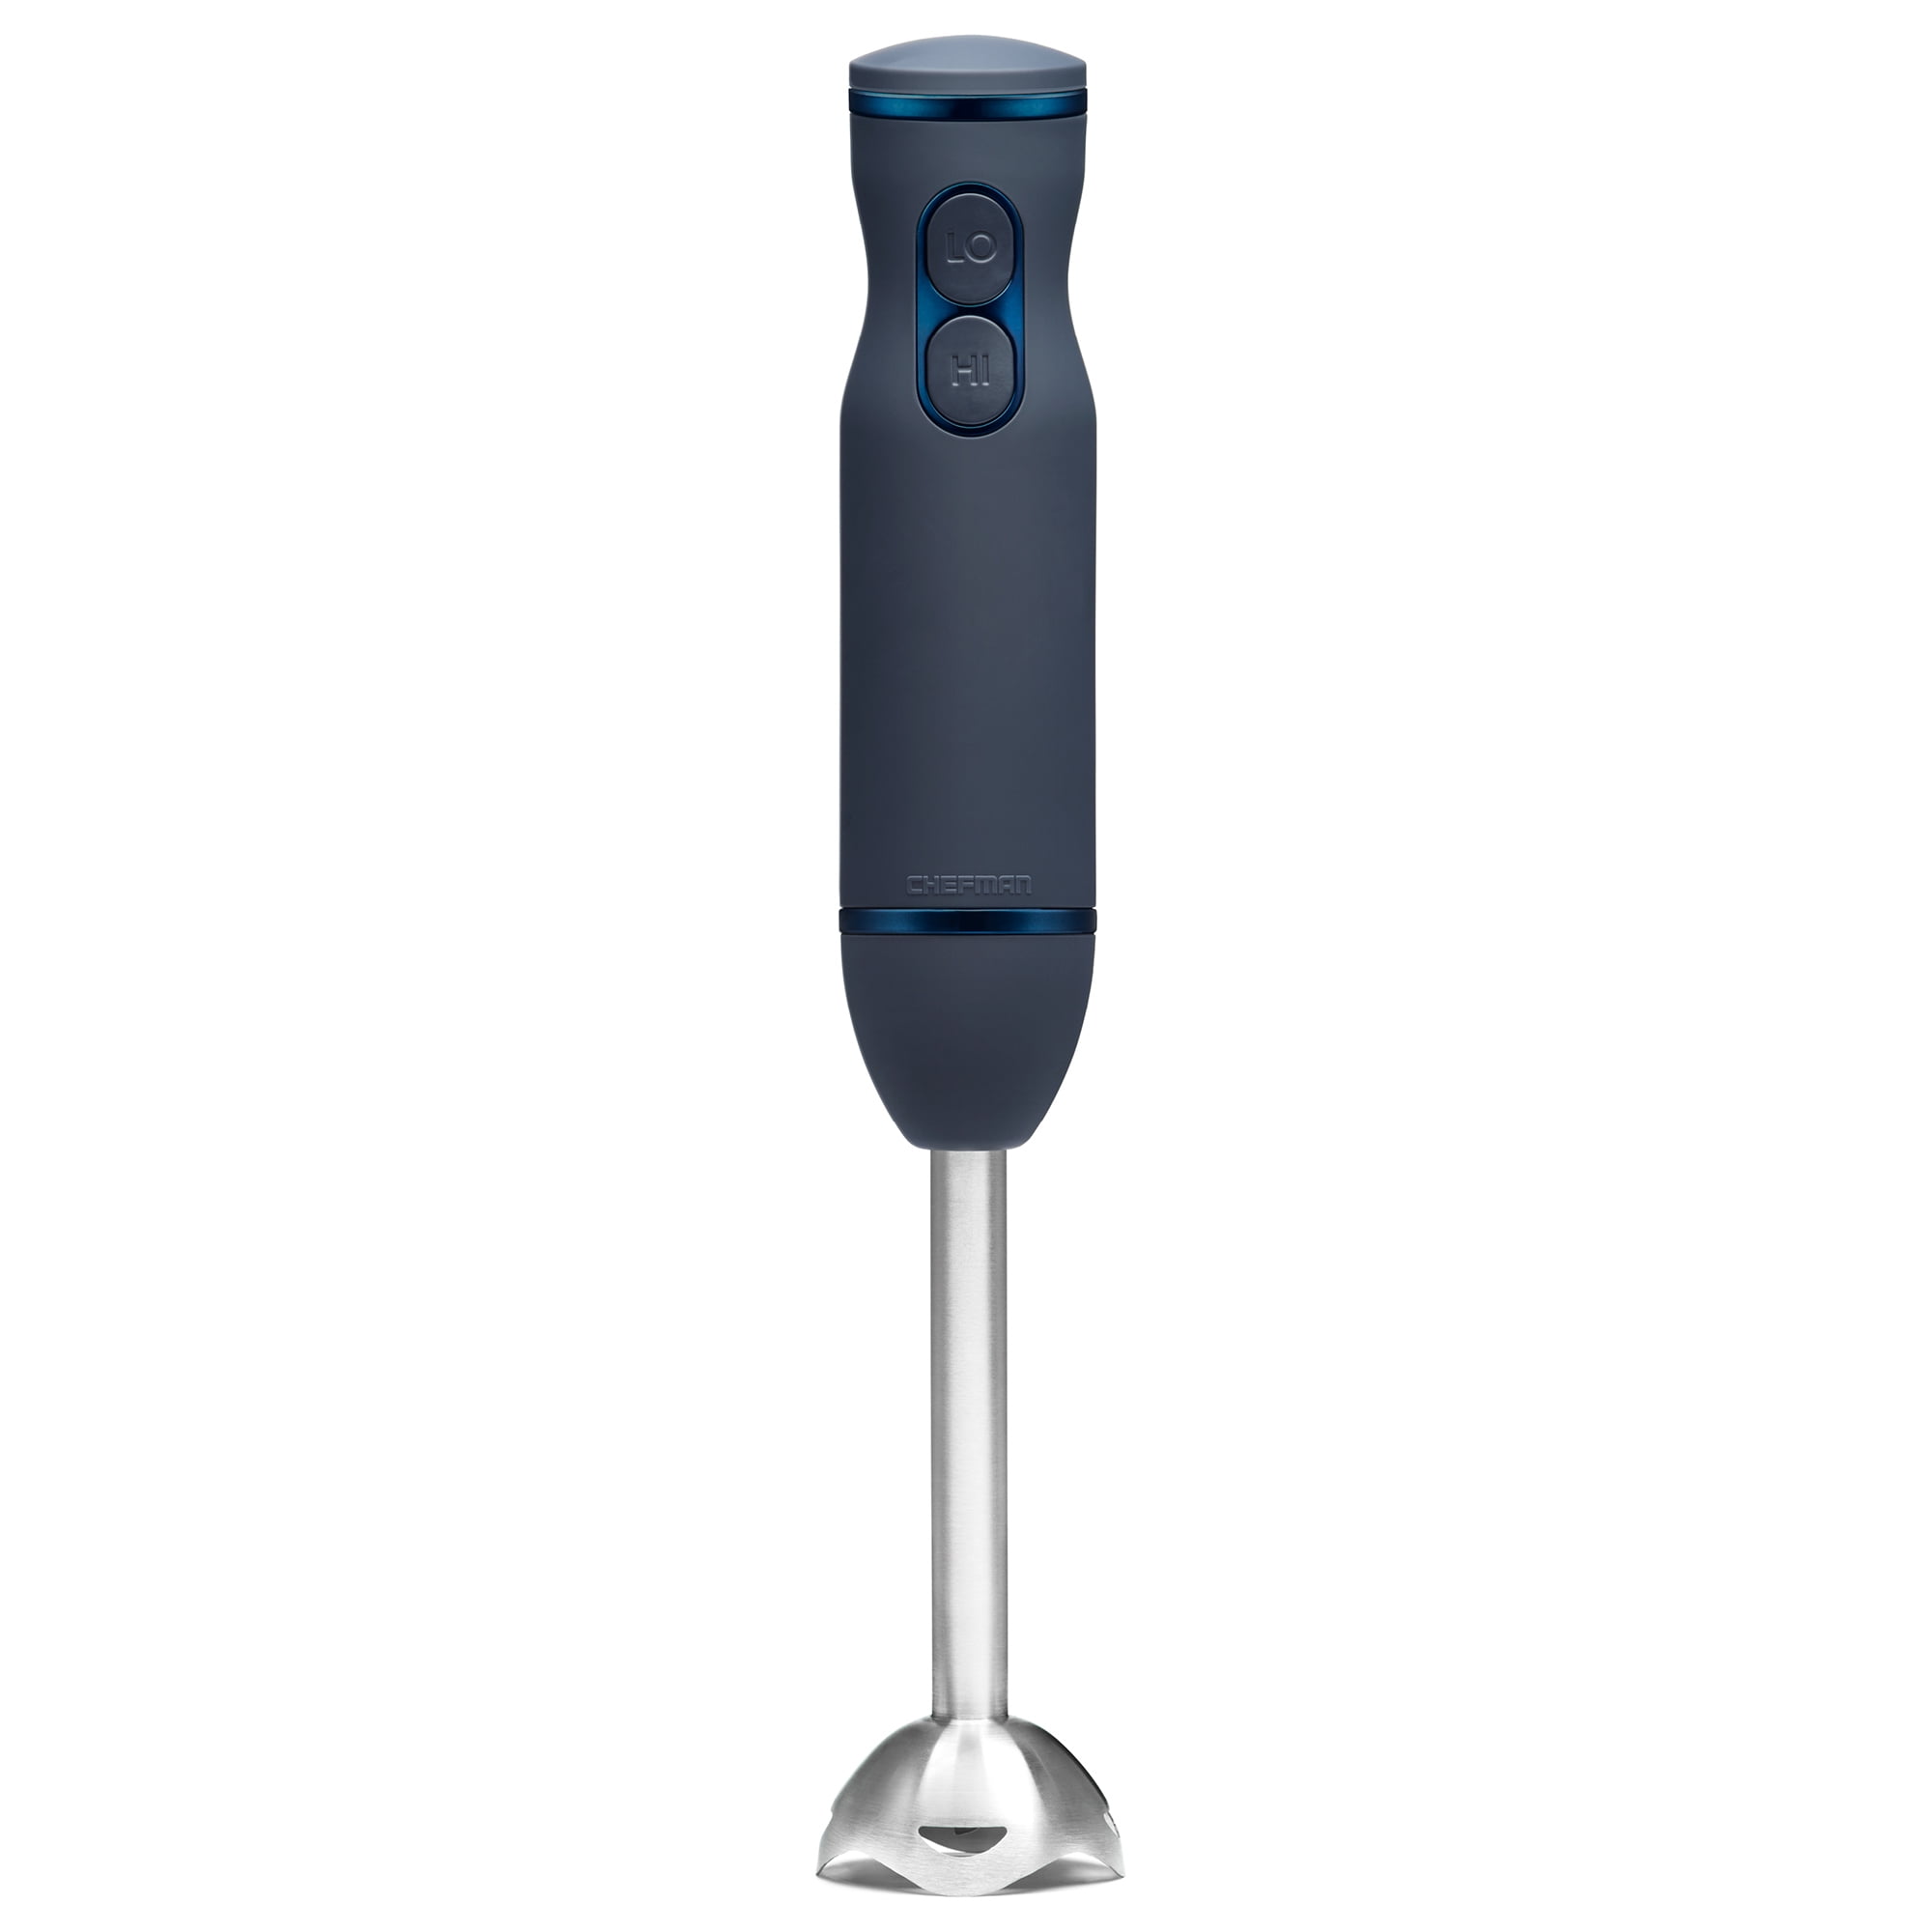 Chefman Cordless Portable Immersion Blender with One-Touch Speed Control -  Quick Mix for Shakes, Smoothies, Soups